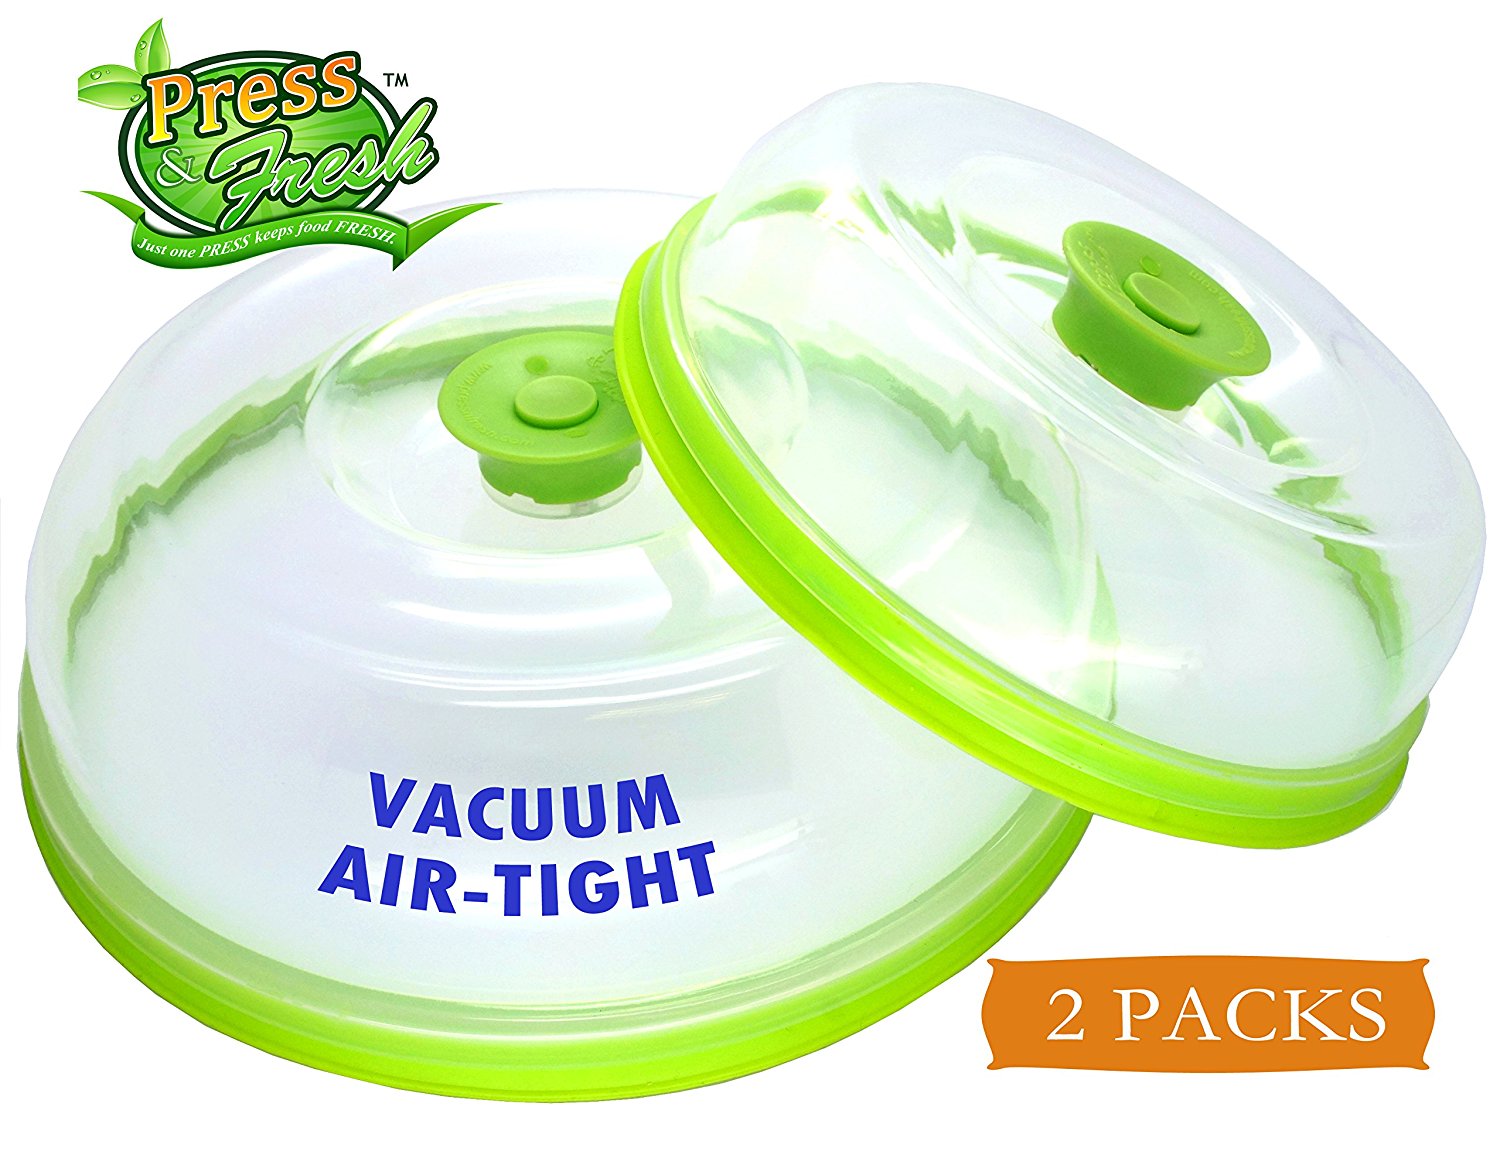 Press n Fresh Universal Vacuum Air-tight Food Sealer Container Plate Platter Lid Cover Topper Dome, Stackable, Safe for Microwave, Dishwasher and BPA Free (9 & 7 inches, Green)